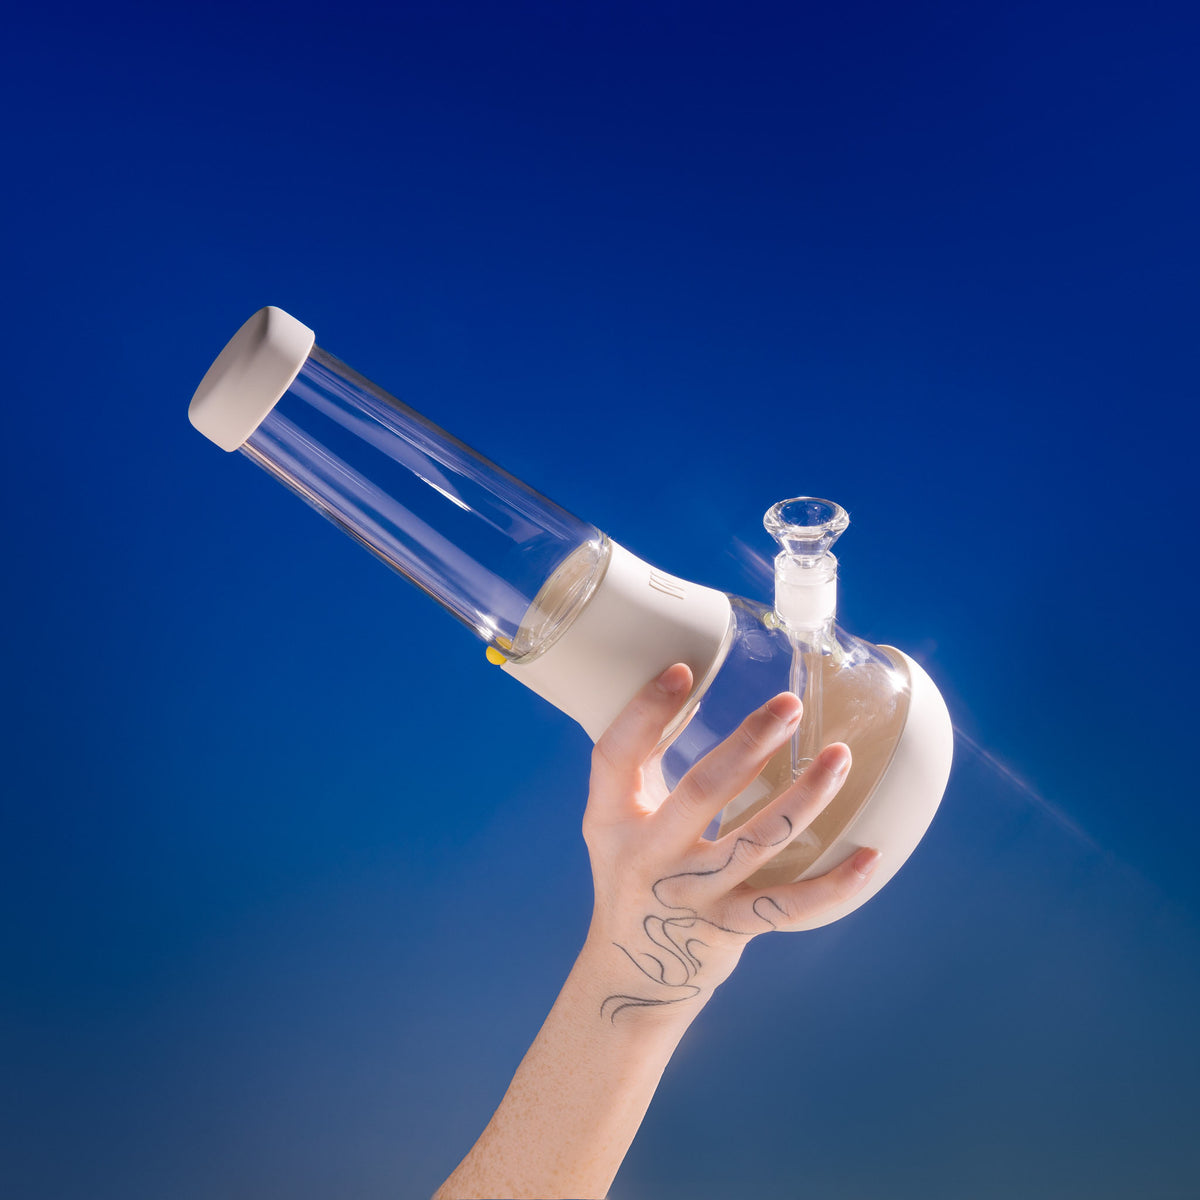 Hand holding up a clear, glowy, crystal-like glass beaker bong with a cream-white silicone cover against a vibrant blue background.